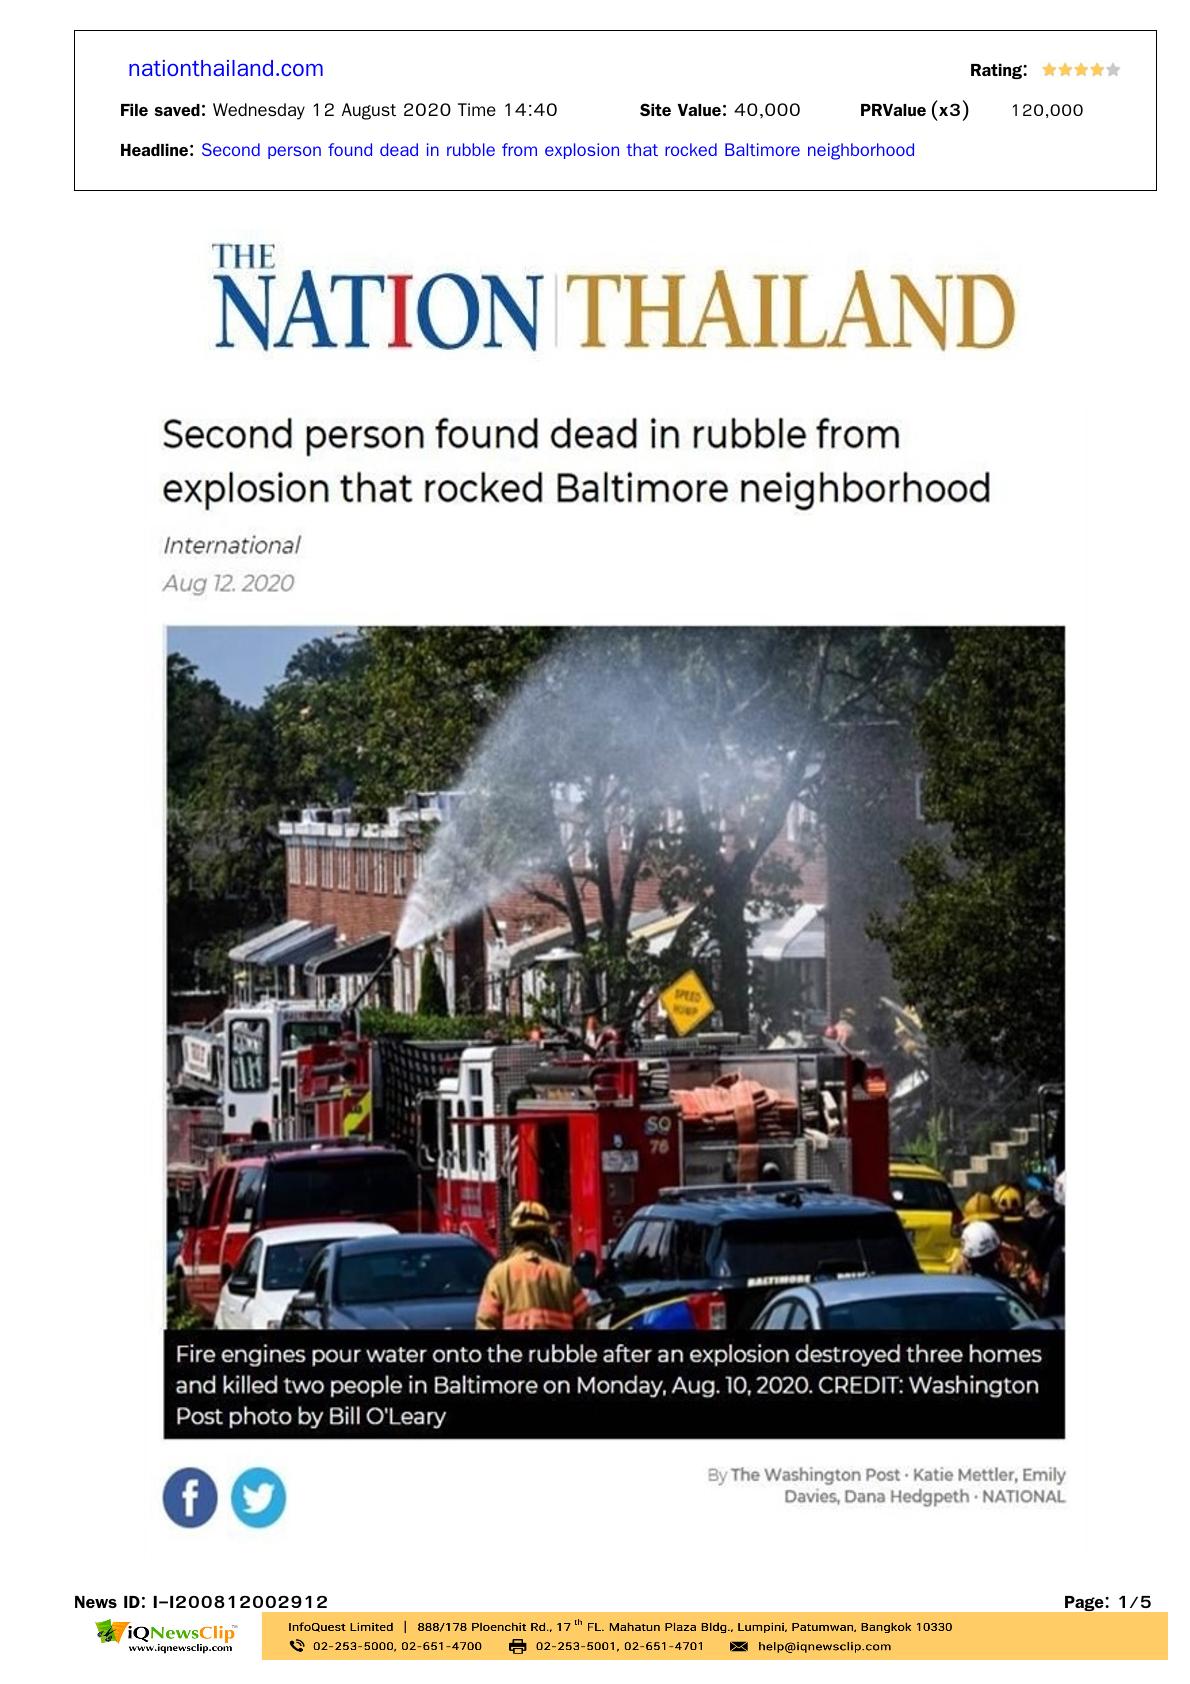 Second person found dead in rubble from explosion that rocked Baltimore neighborhood